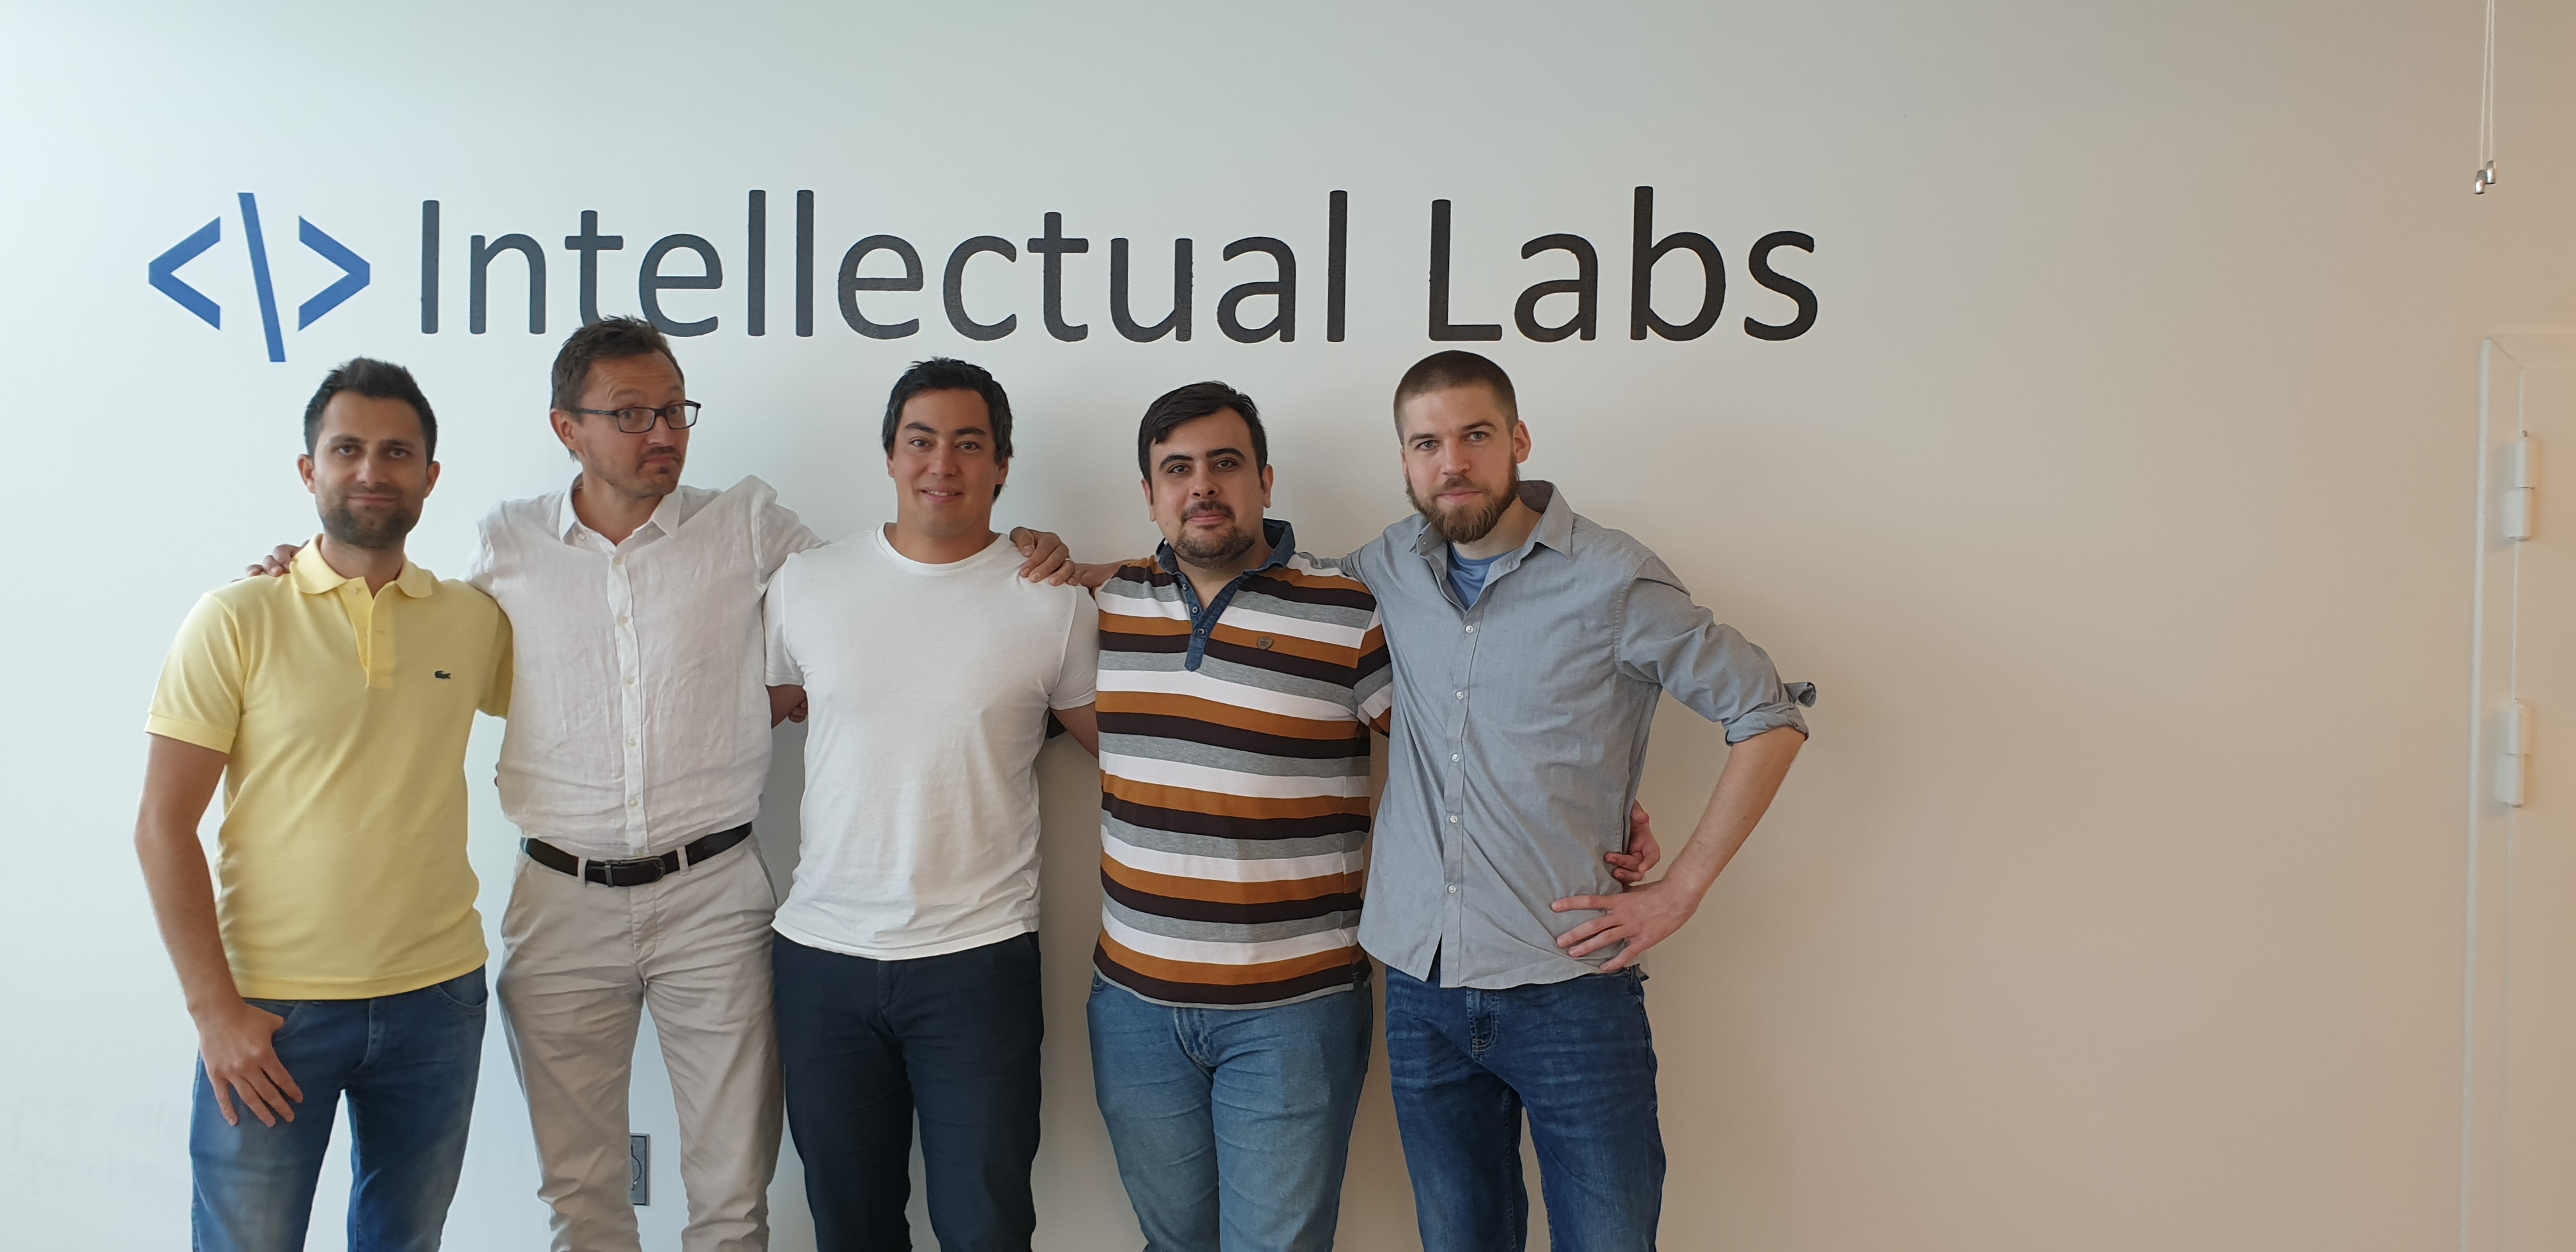 Moments, events and activities around the world at Intellectual Labs